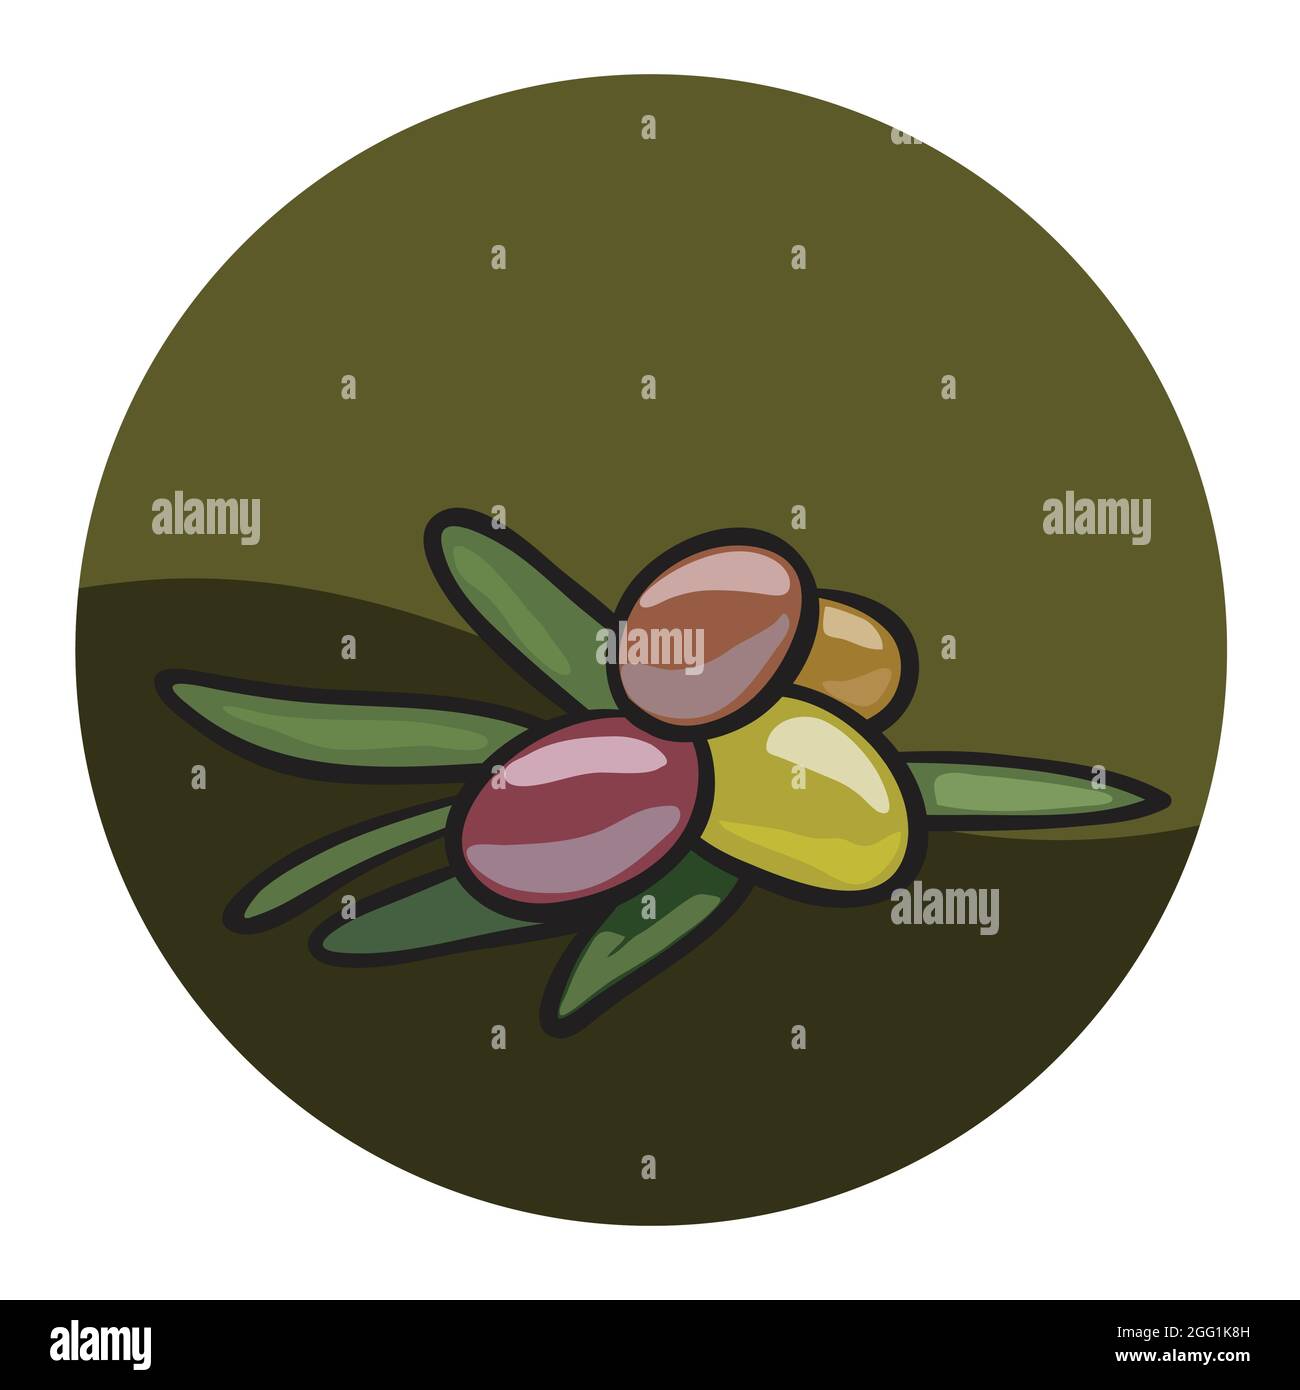 Olive fruit icon Stock Vector